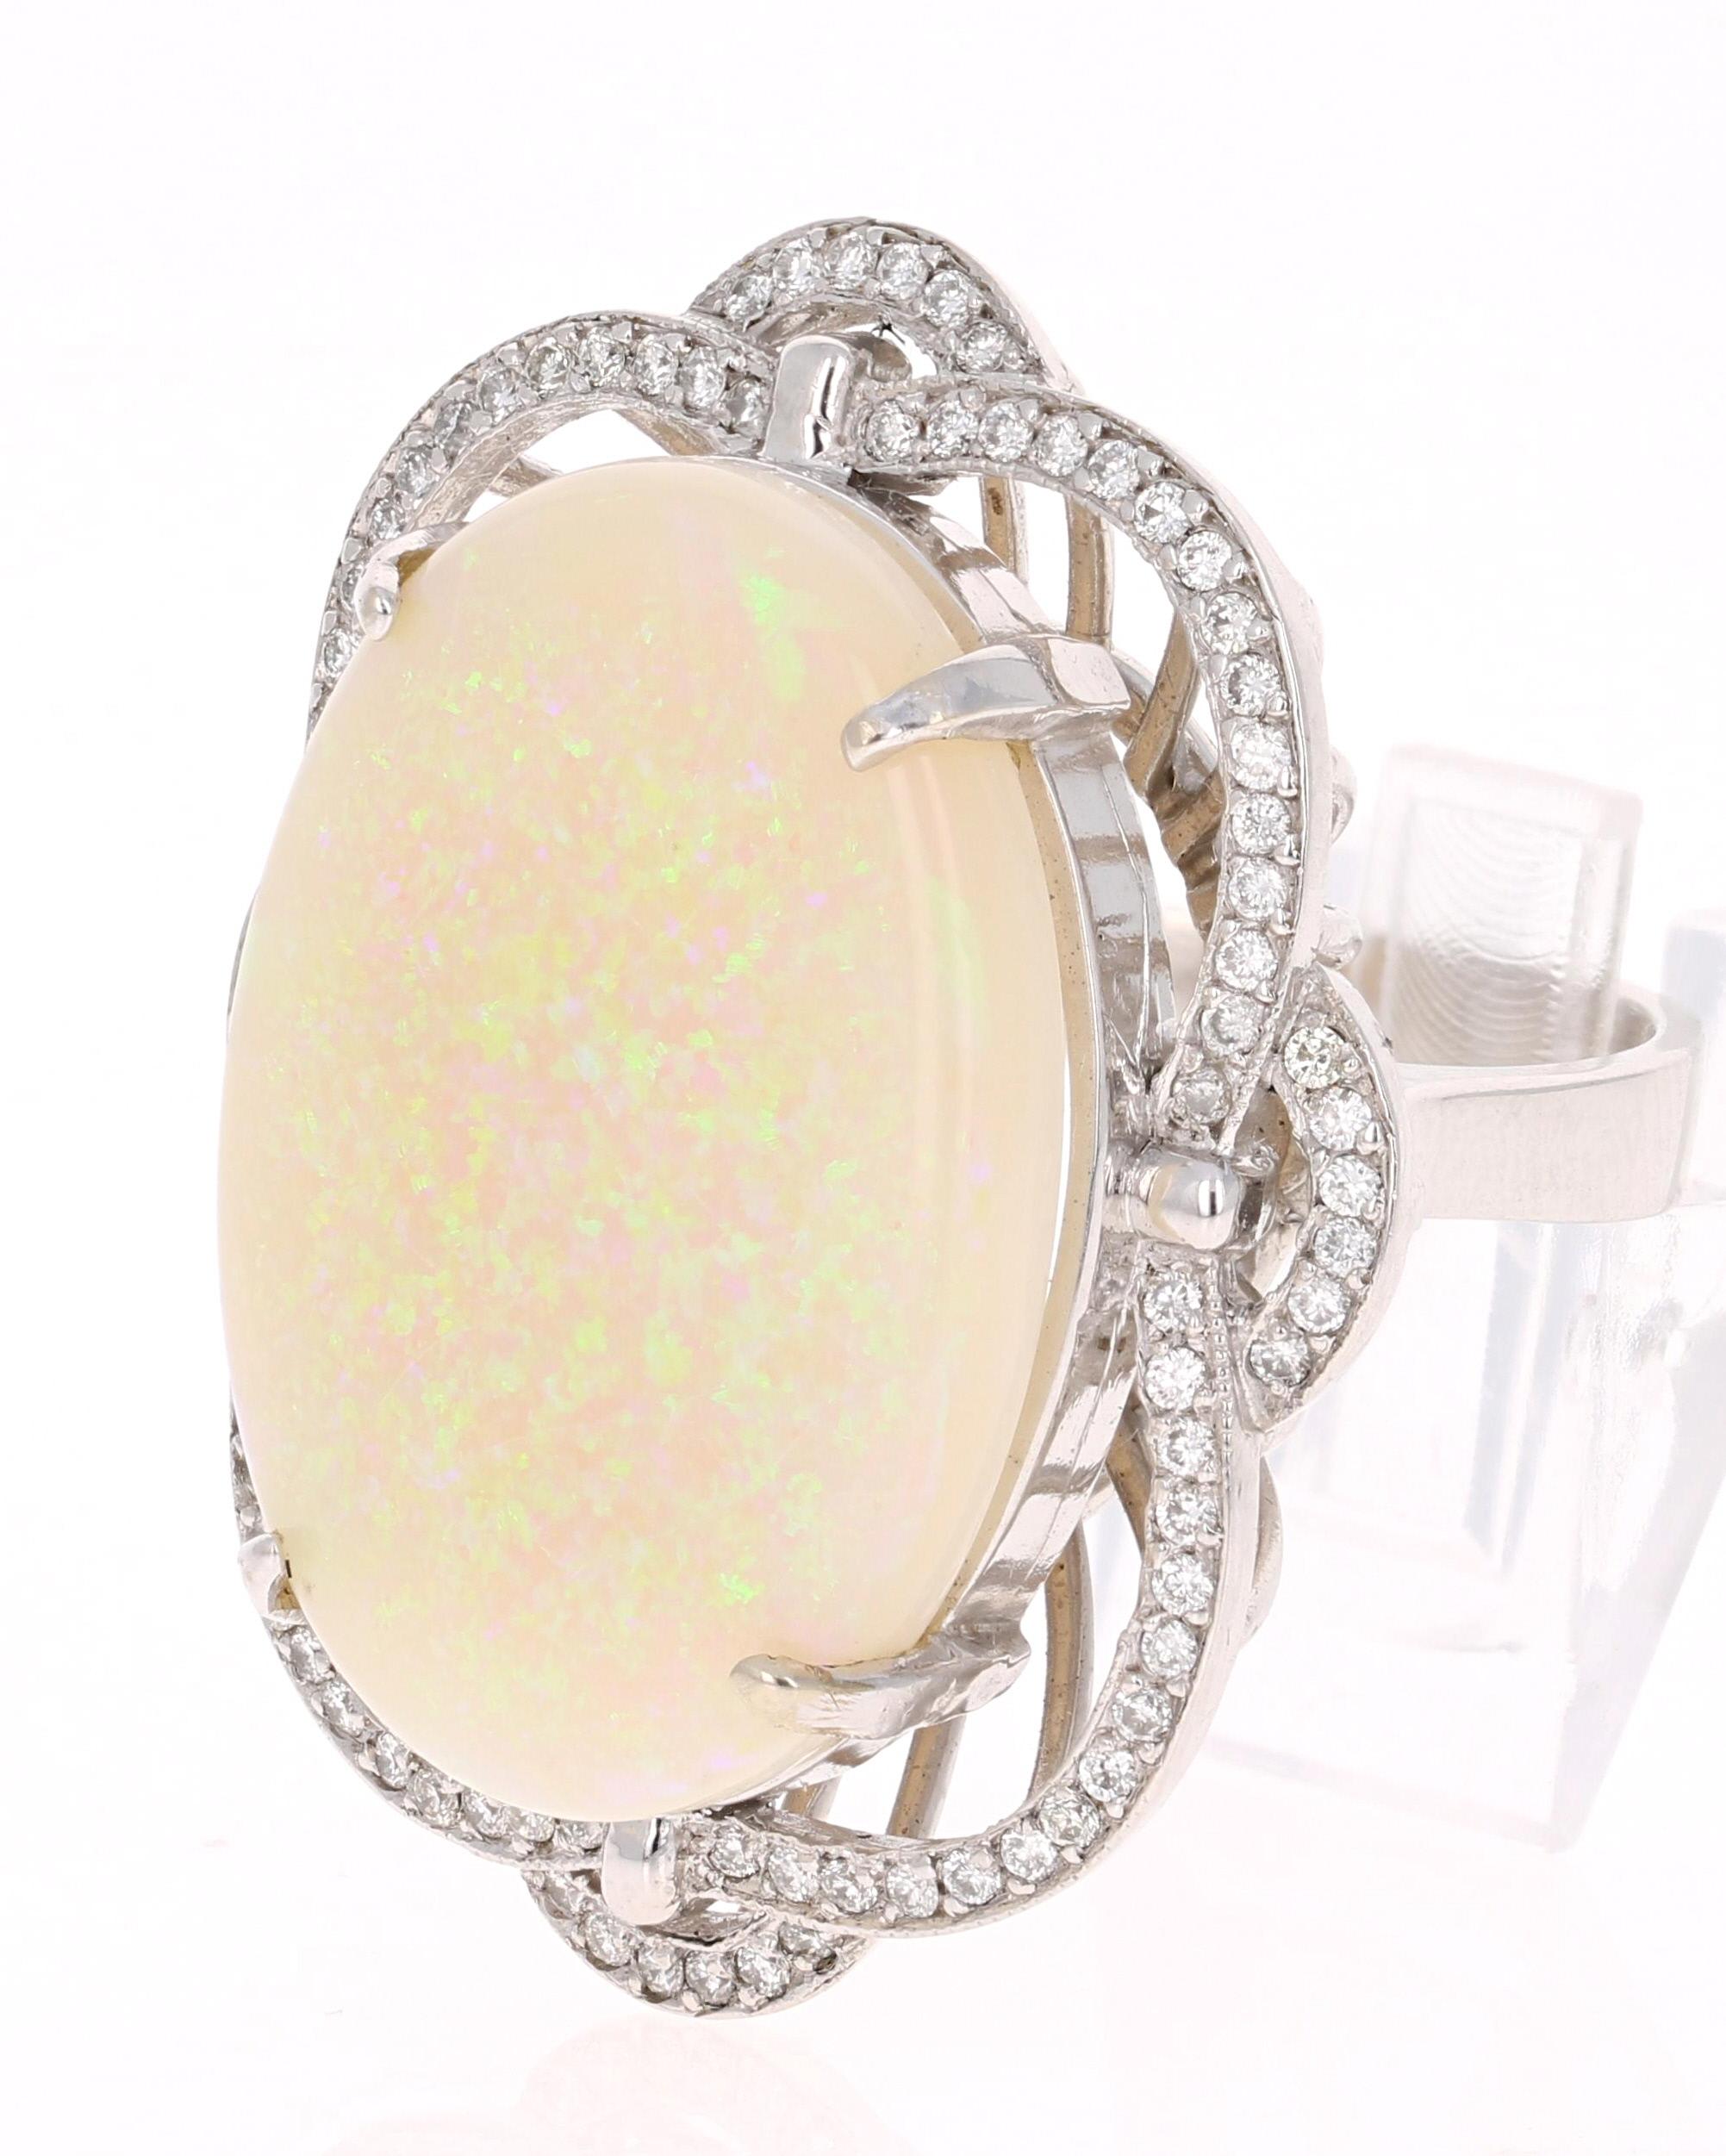 One Of A Kind Opulent Opal Diamond Ring with a setting that is Inspired by the Victorian Era! 

This ring has a 21.14 Carat Opal that is curated in a unique 14 Karat White Gold setting. The setting is adorned with 84 Round Cut Diamonds that weigh